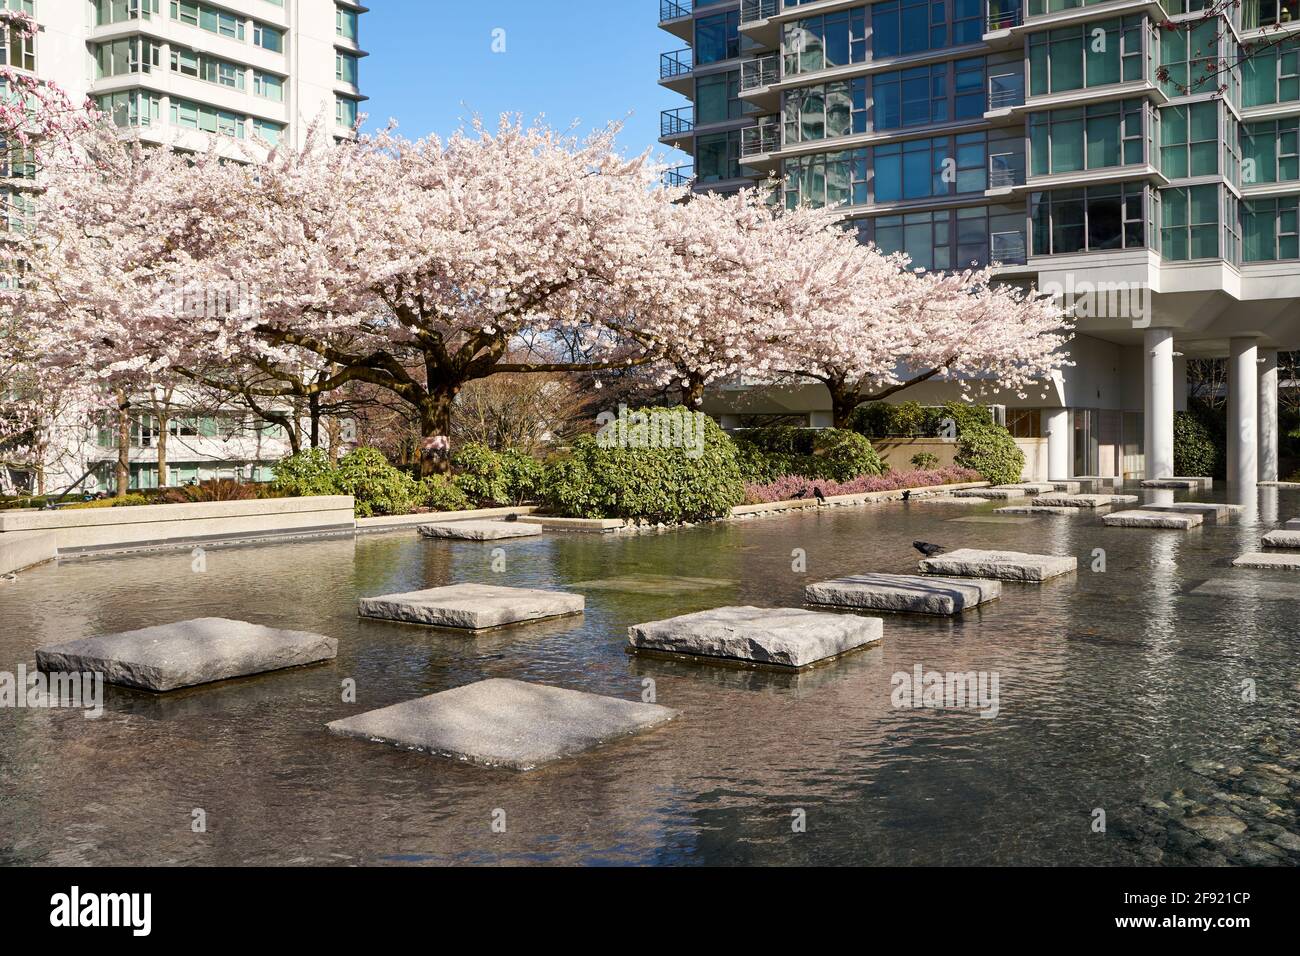 Blossoming ornamental cherry trees in spring in downtown Vancouver, British Columbia, Canada Stock Photo